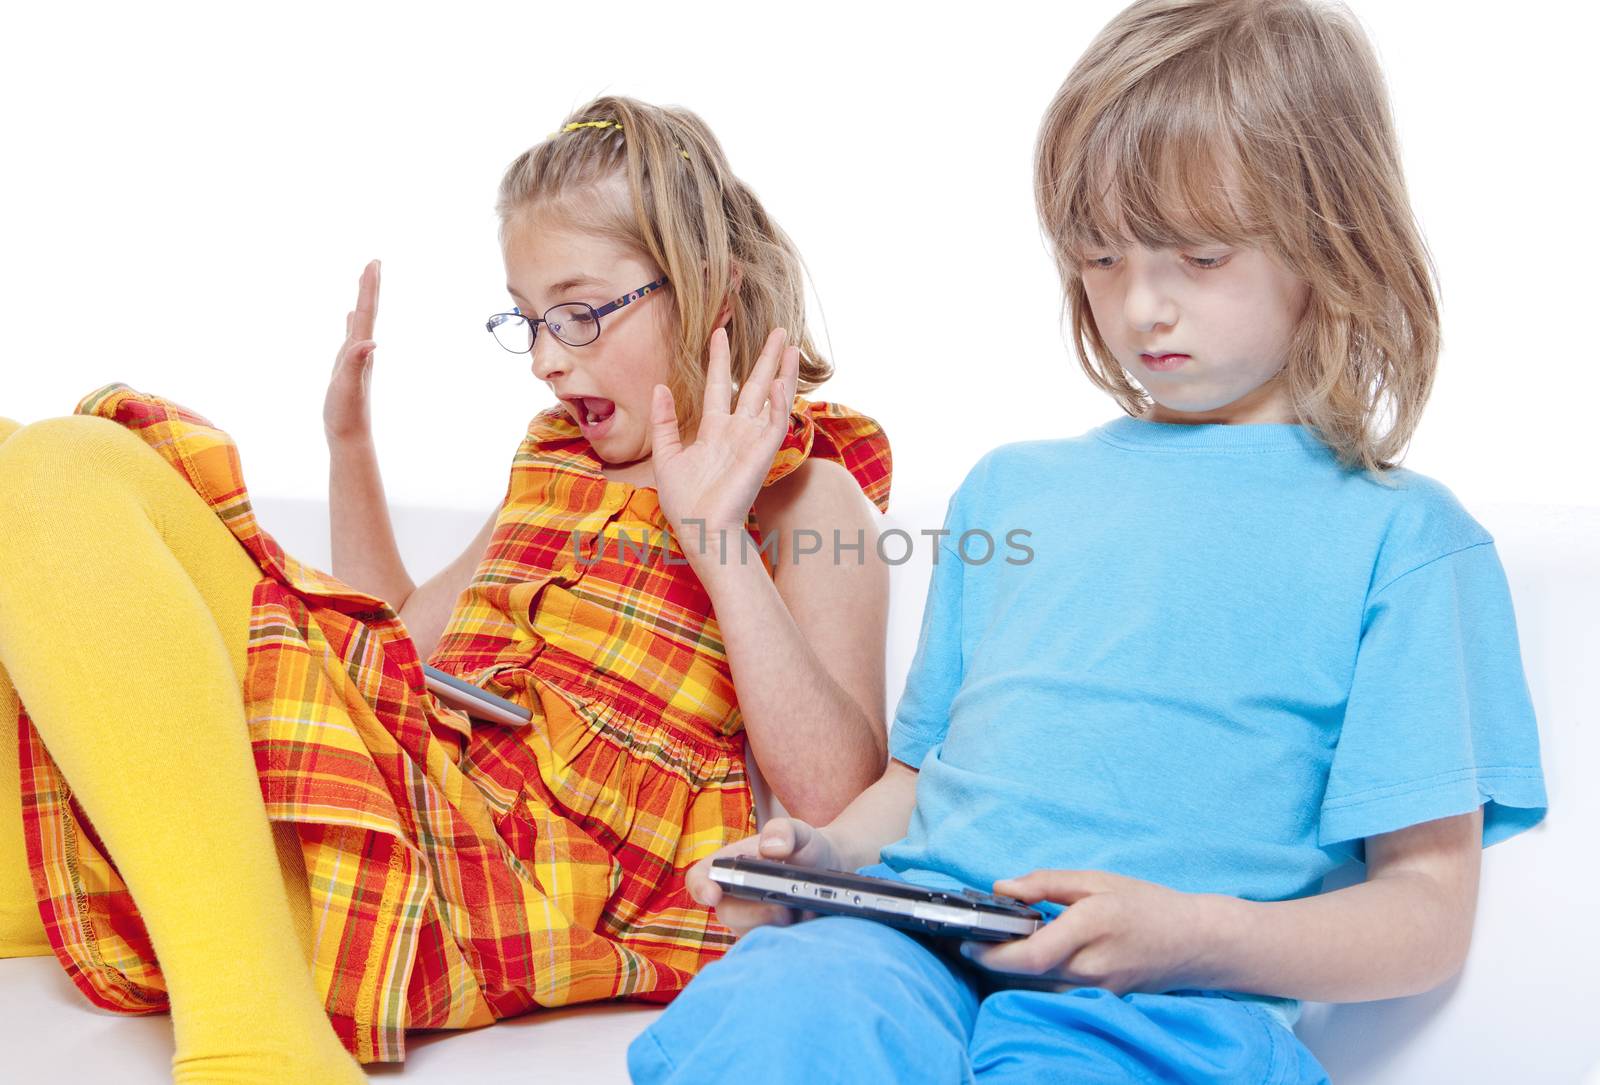 Two Children Having Fun with Digital Gadgets - Isolated on White